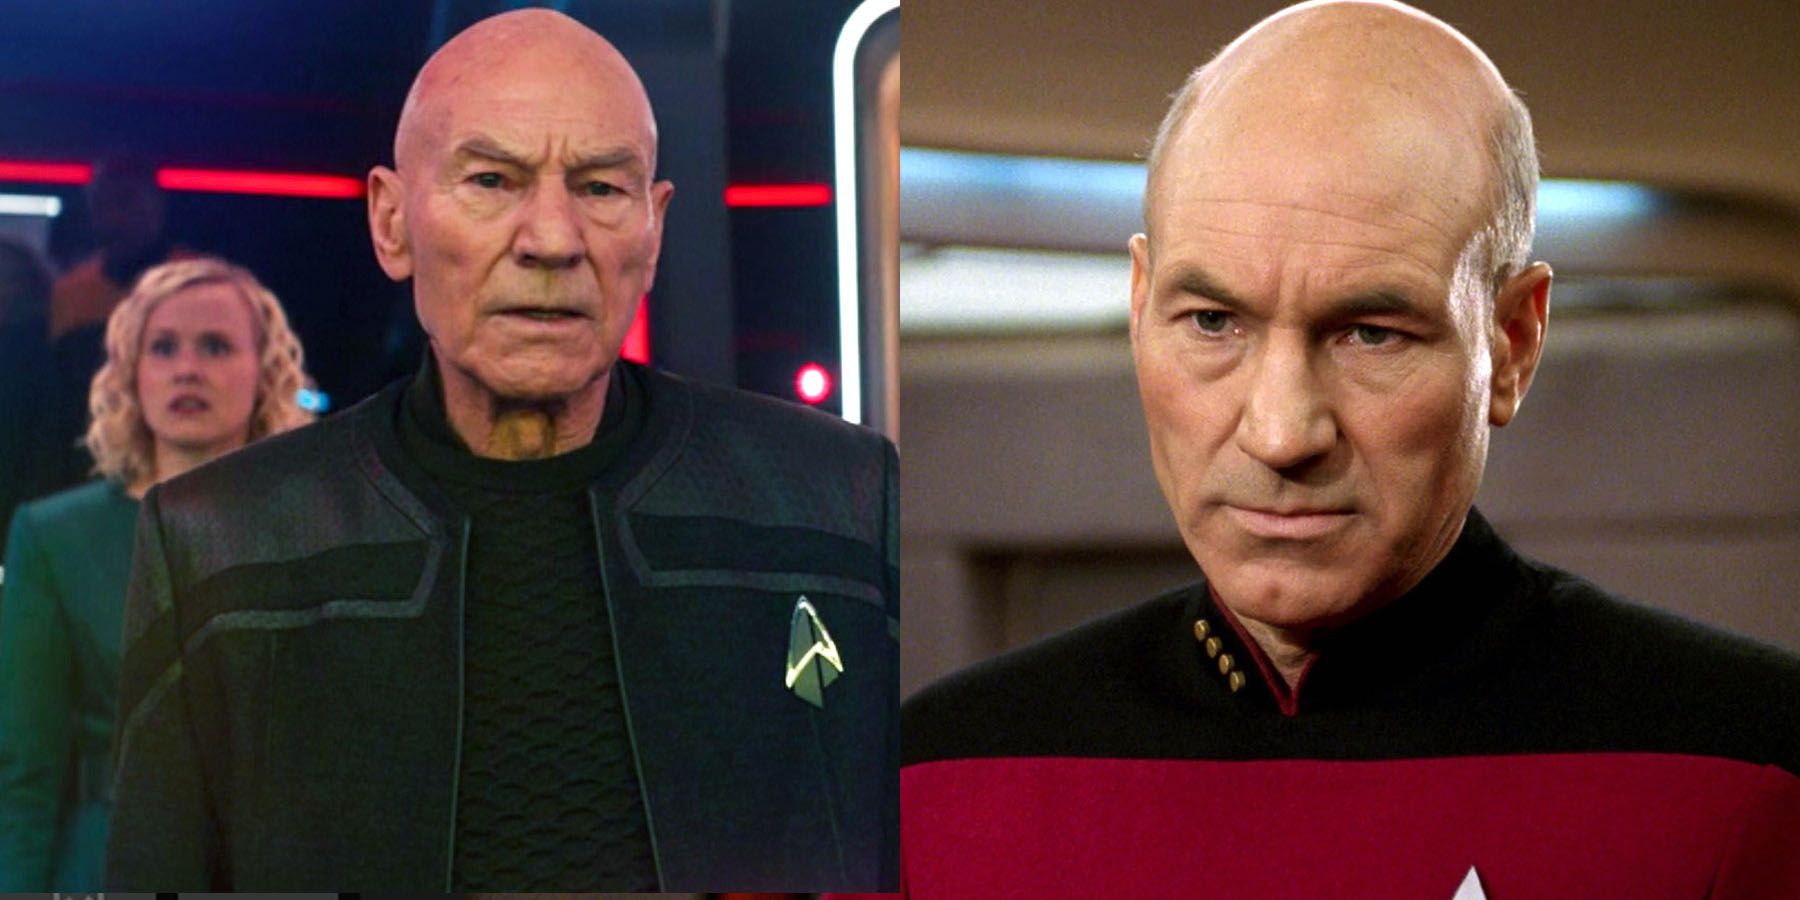 Things That Happened To Picard Between The Next Generation & The 2020 Show